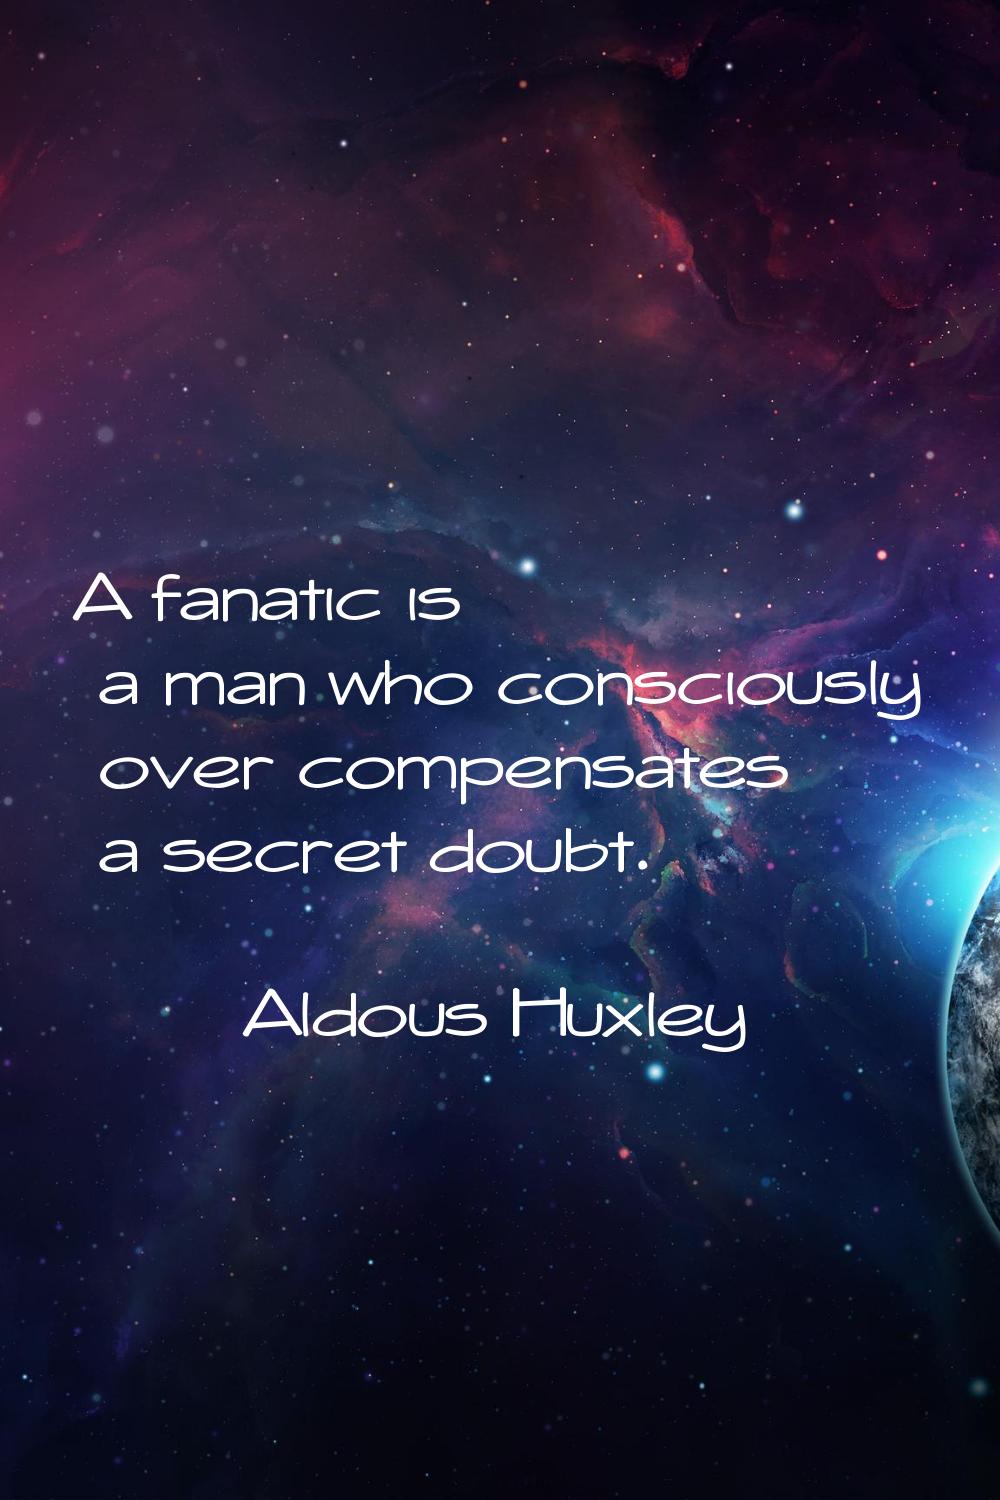 A fanatic is a man who consciously over compensates a secret doubt.